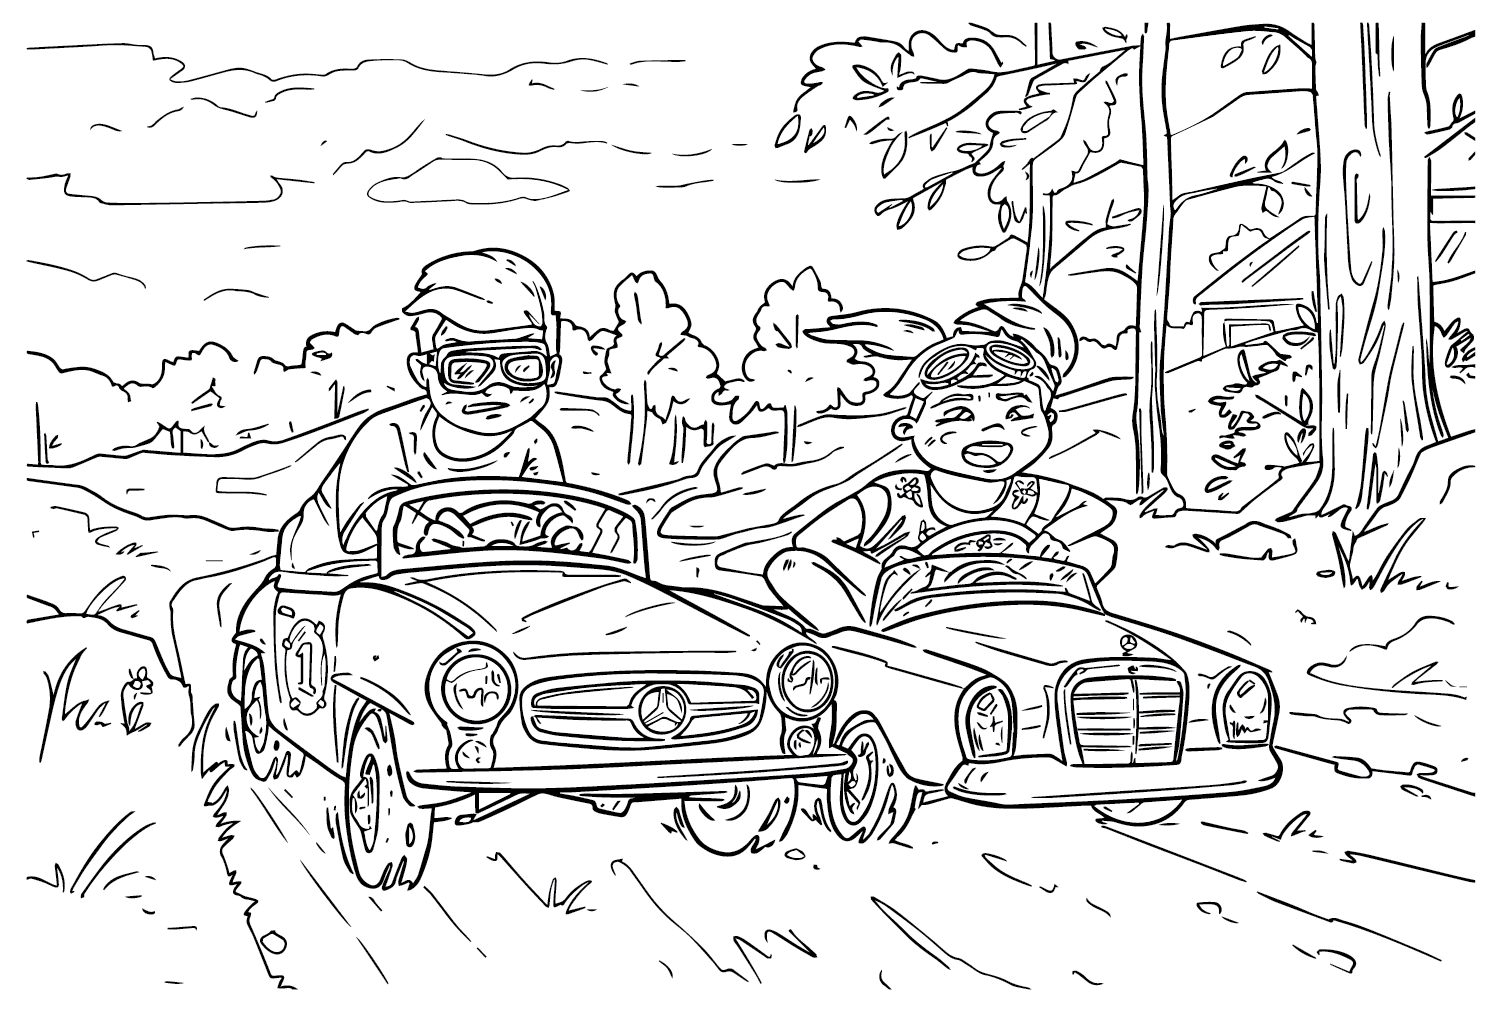 Mercedes-Benz Mini Coloring Page from Mercedes-Benz